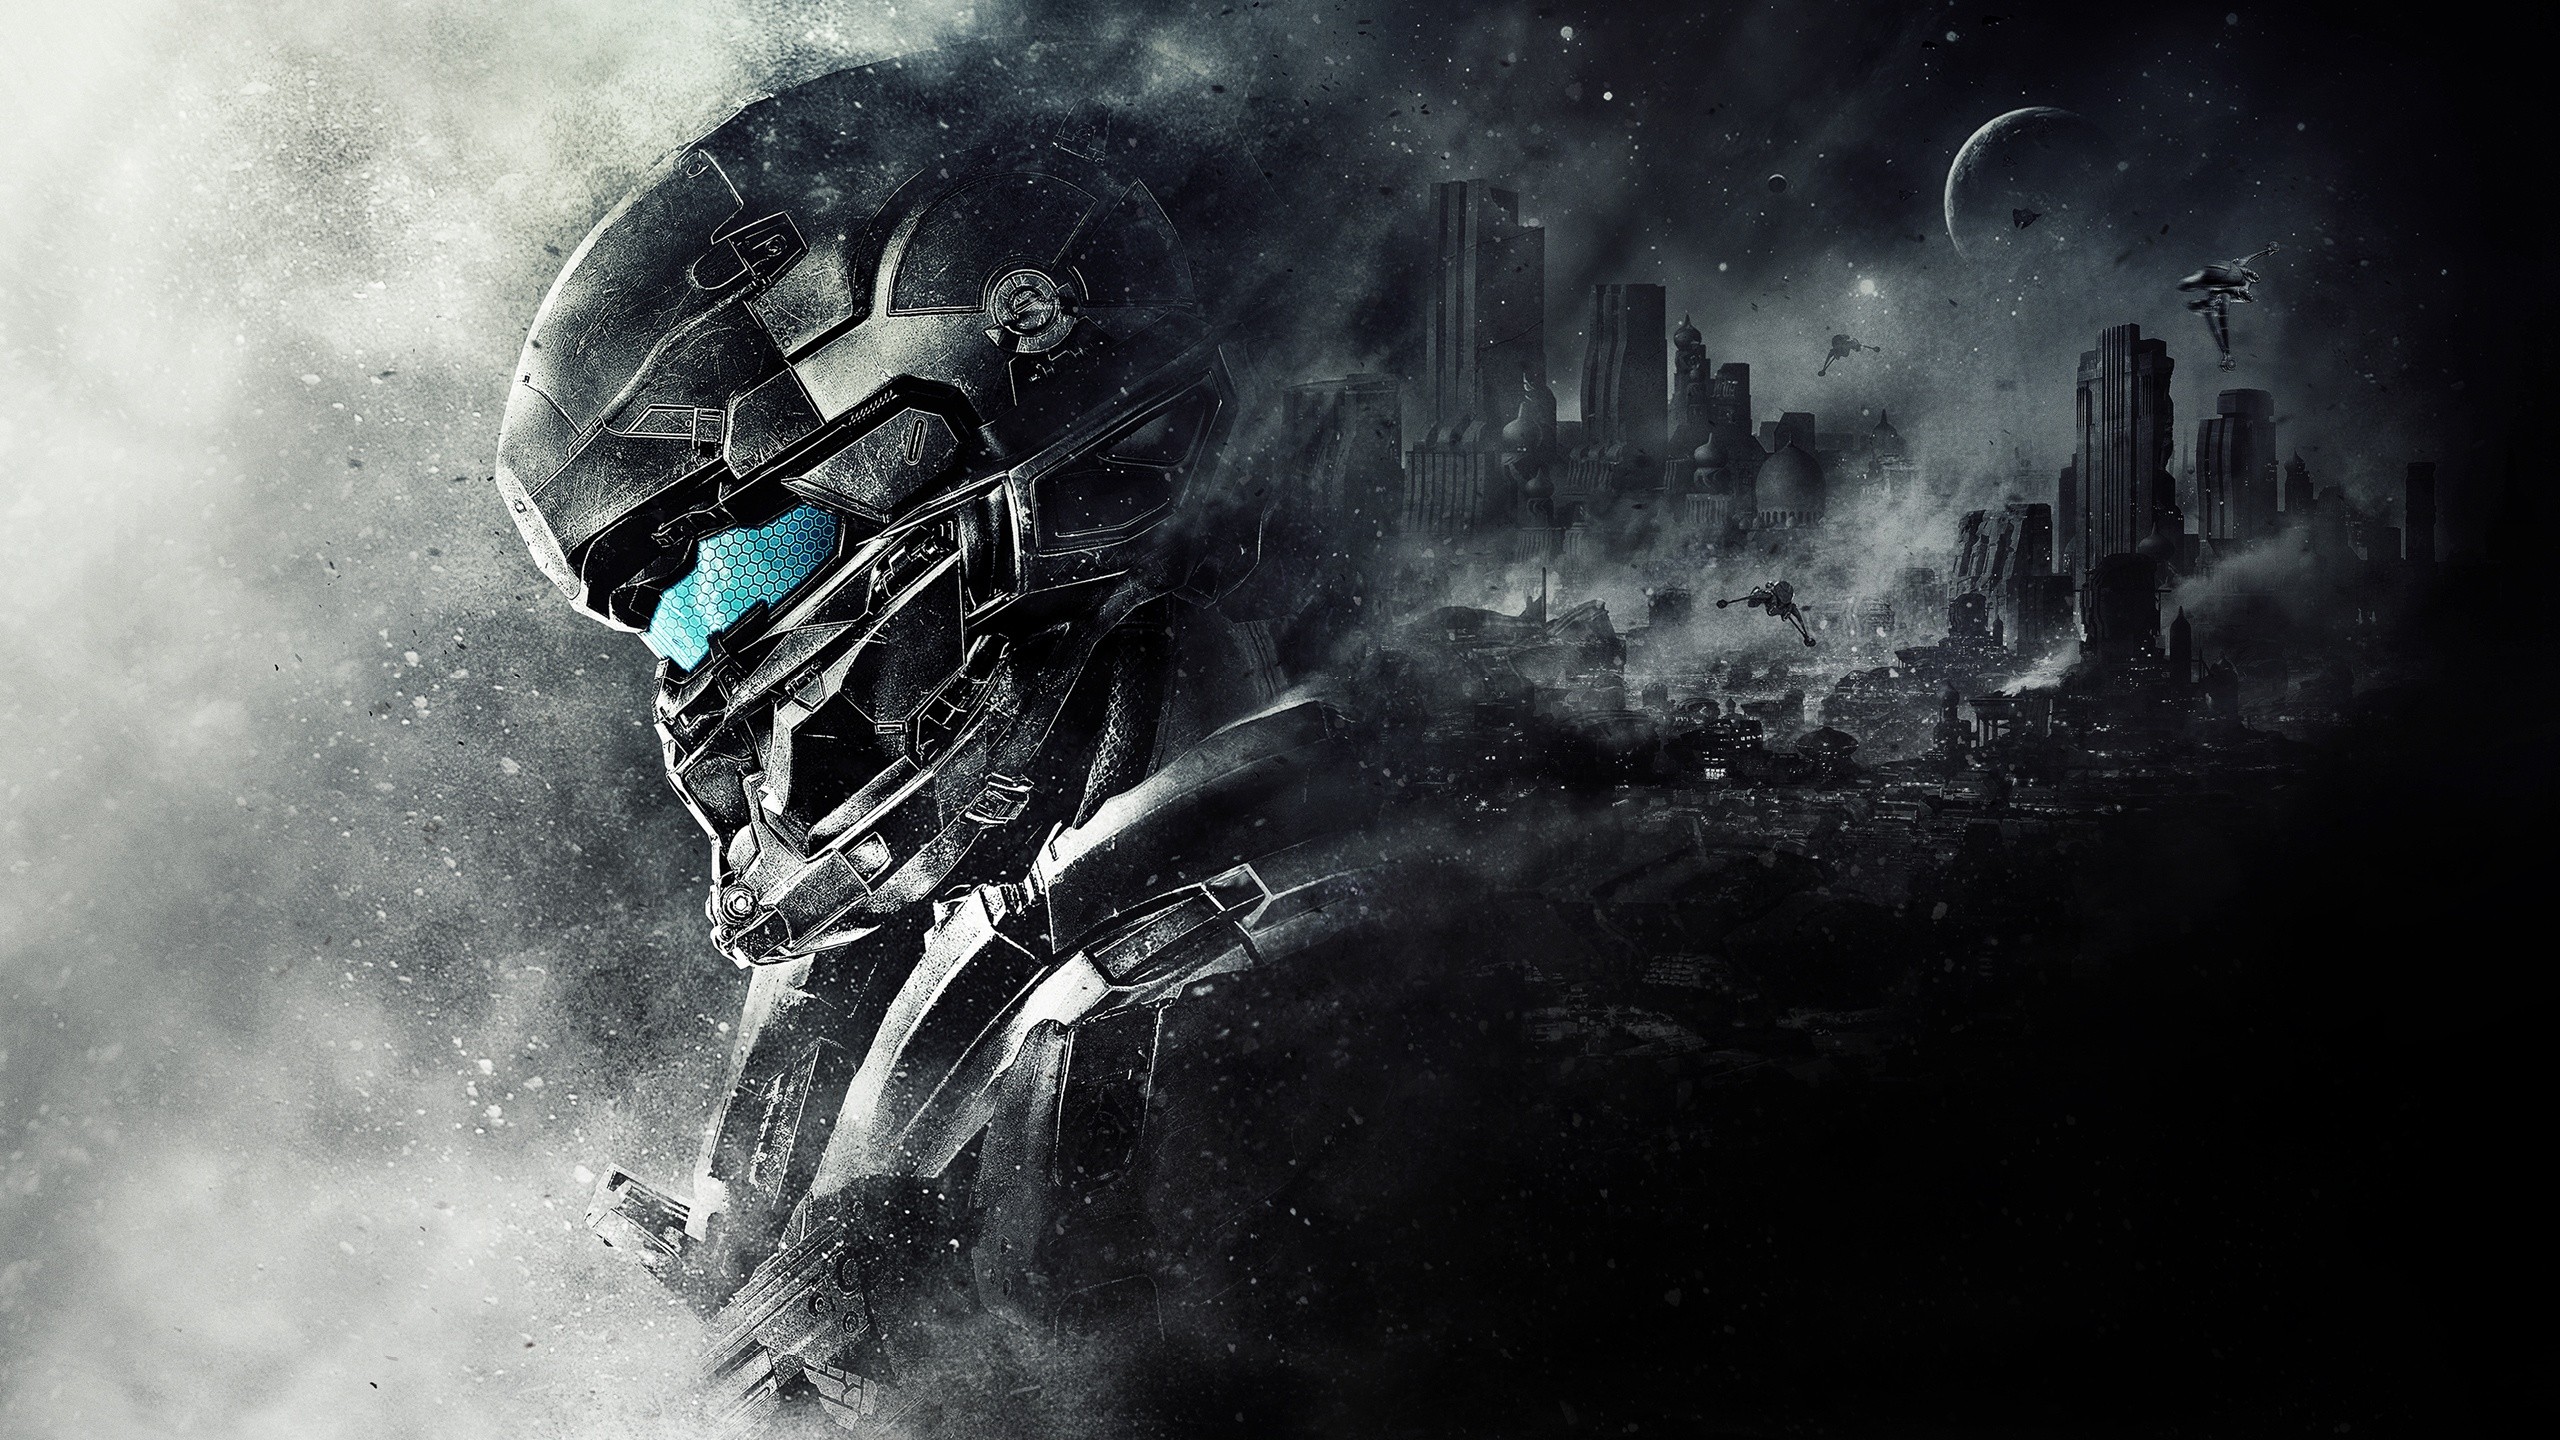 Halo 5 Master Chief Halo 343 Industries Video Games Concept Art Science Fiction Space Spaceship Armo 2560x1440